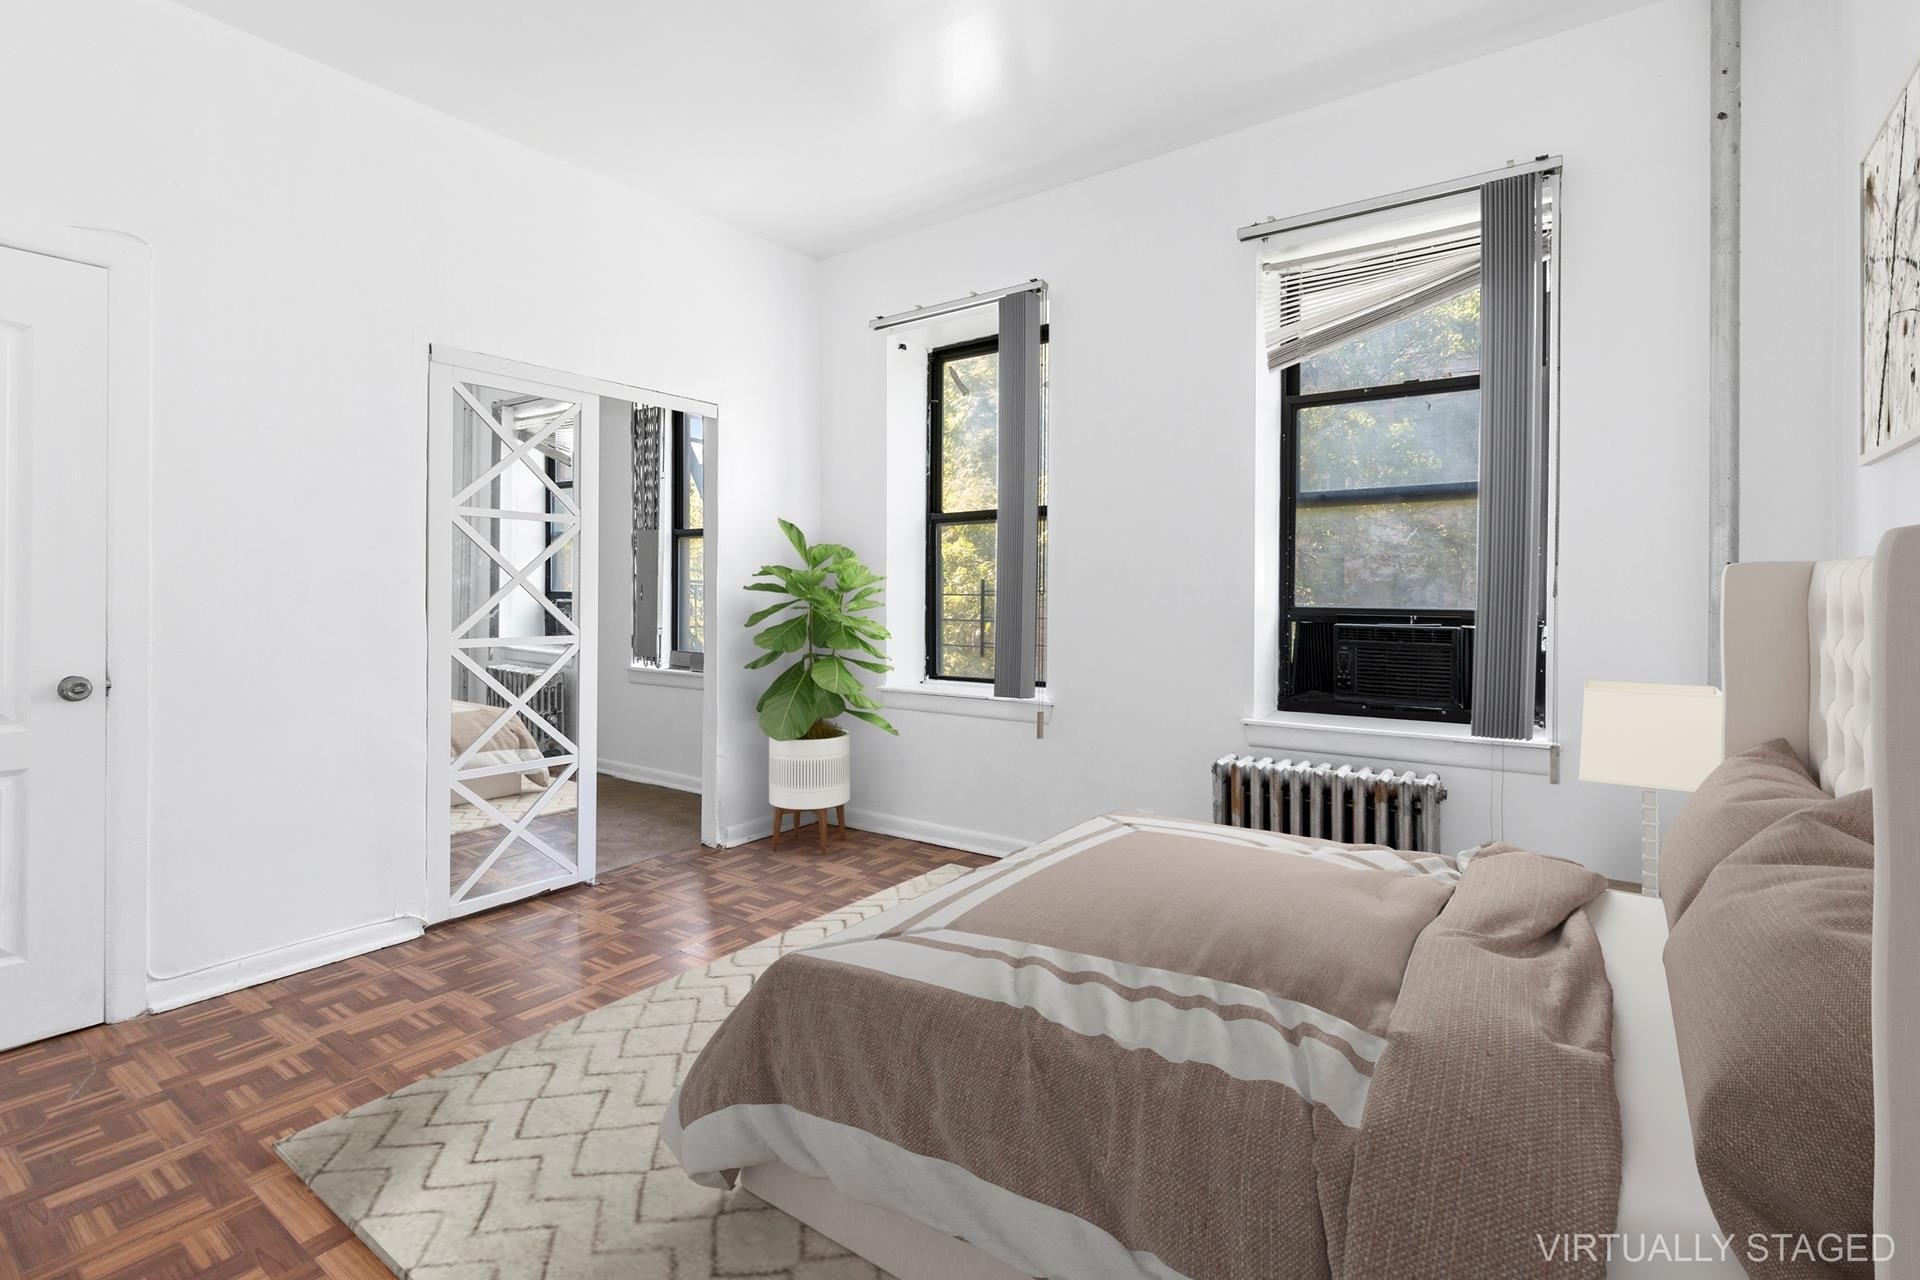 Co-op Properties for Sale at 353 W 117TH ST, 3D South Harlem, New York, NY 10026